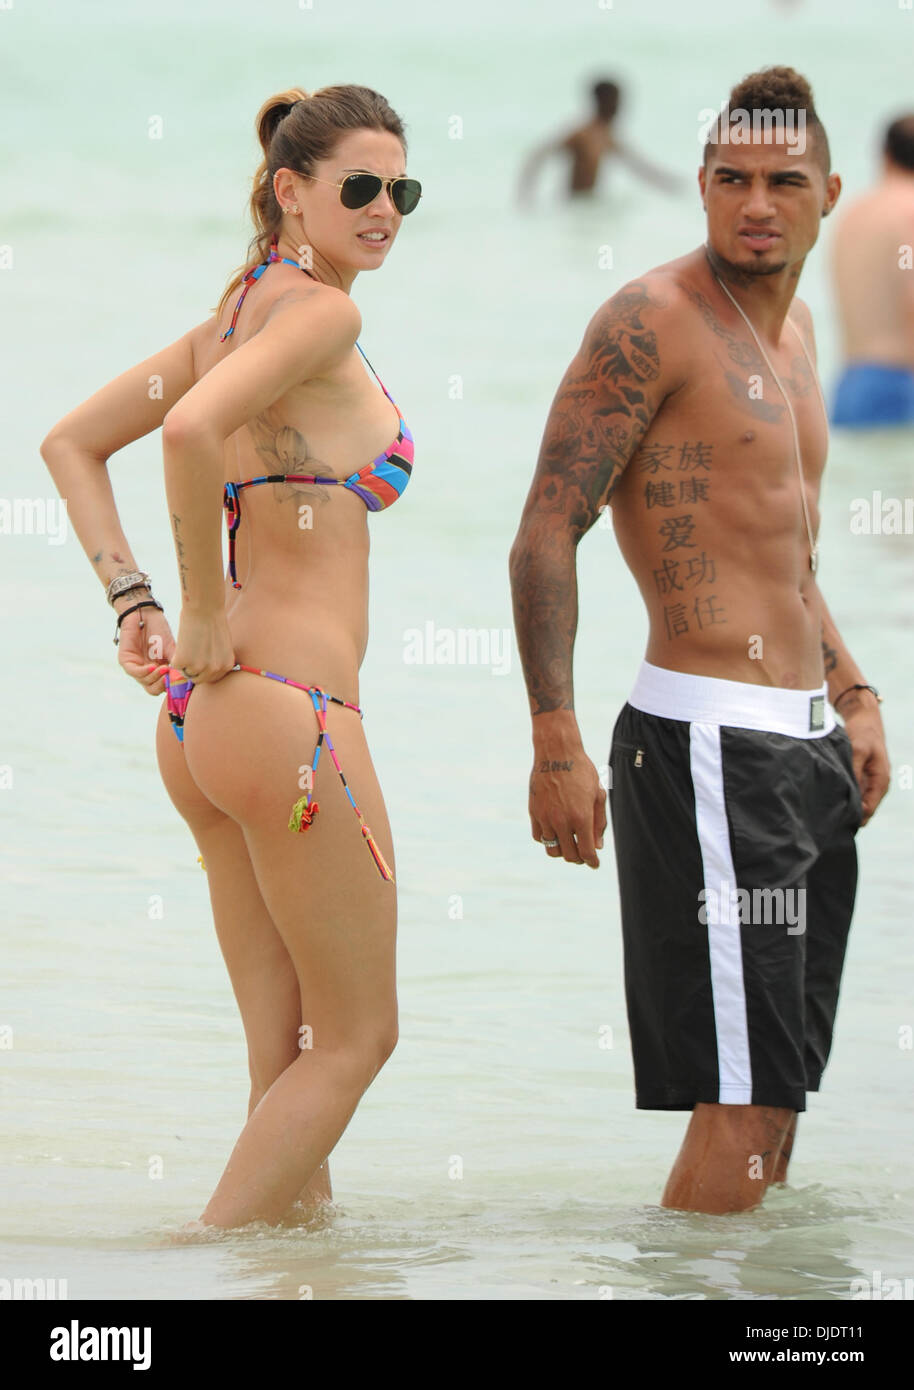 Kevin-Prince Boateng and Melissa Satta spend the day together on Miami  Beach Miami, Florida - 08.06.12 Stock Photo - Alamy